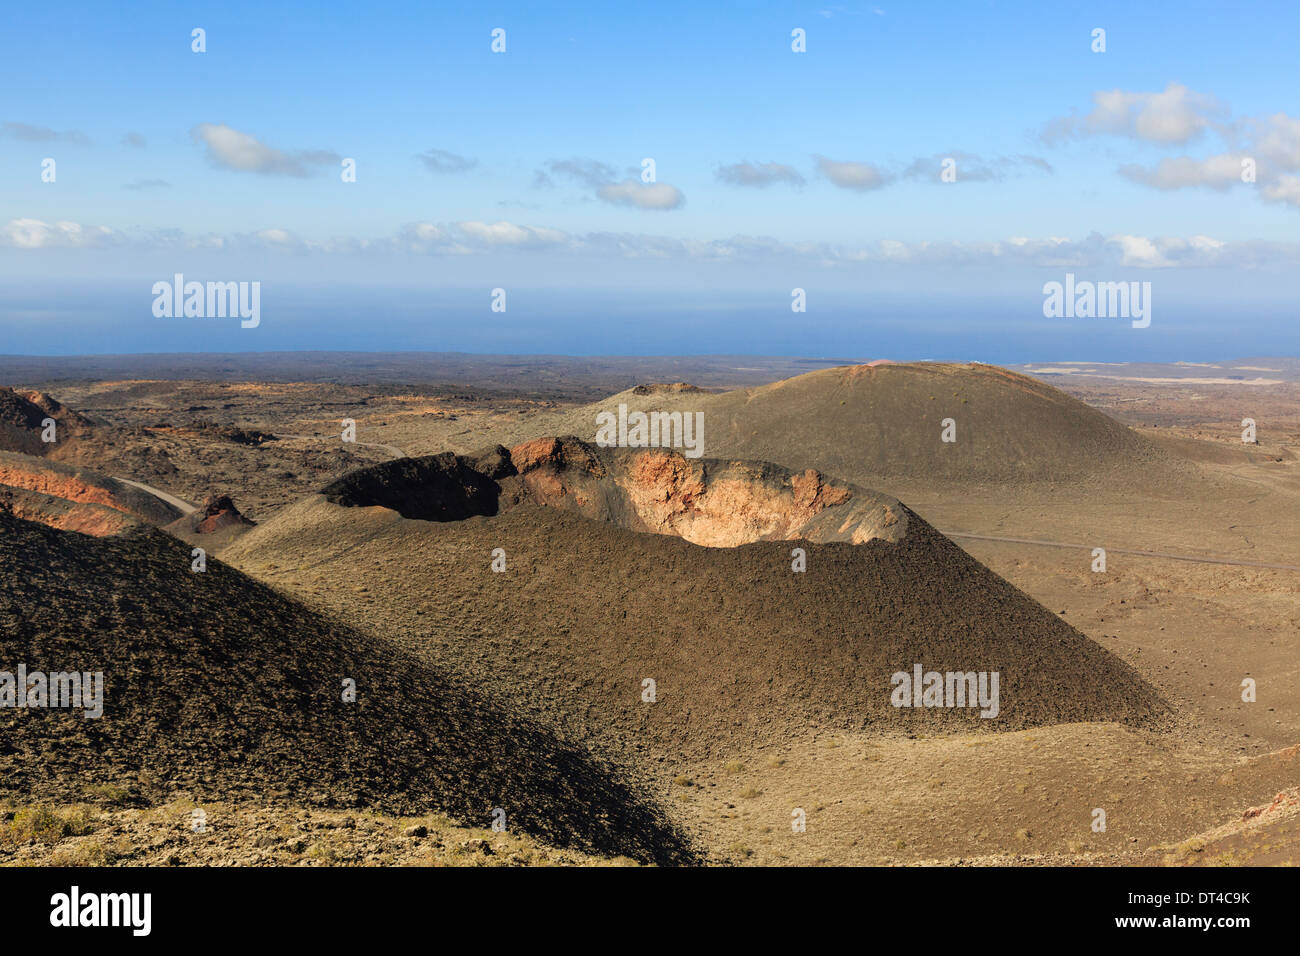 Montanas del Fuego or Fire Mountains and volcanic landscape of lava ash with a crater in Parque Nacional de Timanfaya, Lanzarote Stock Photo